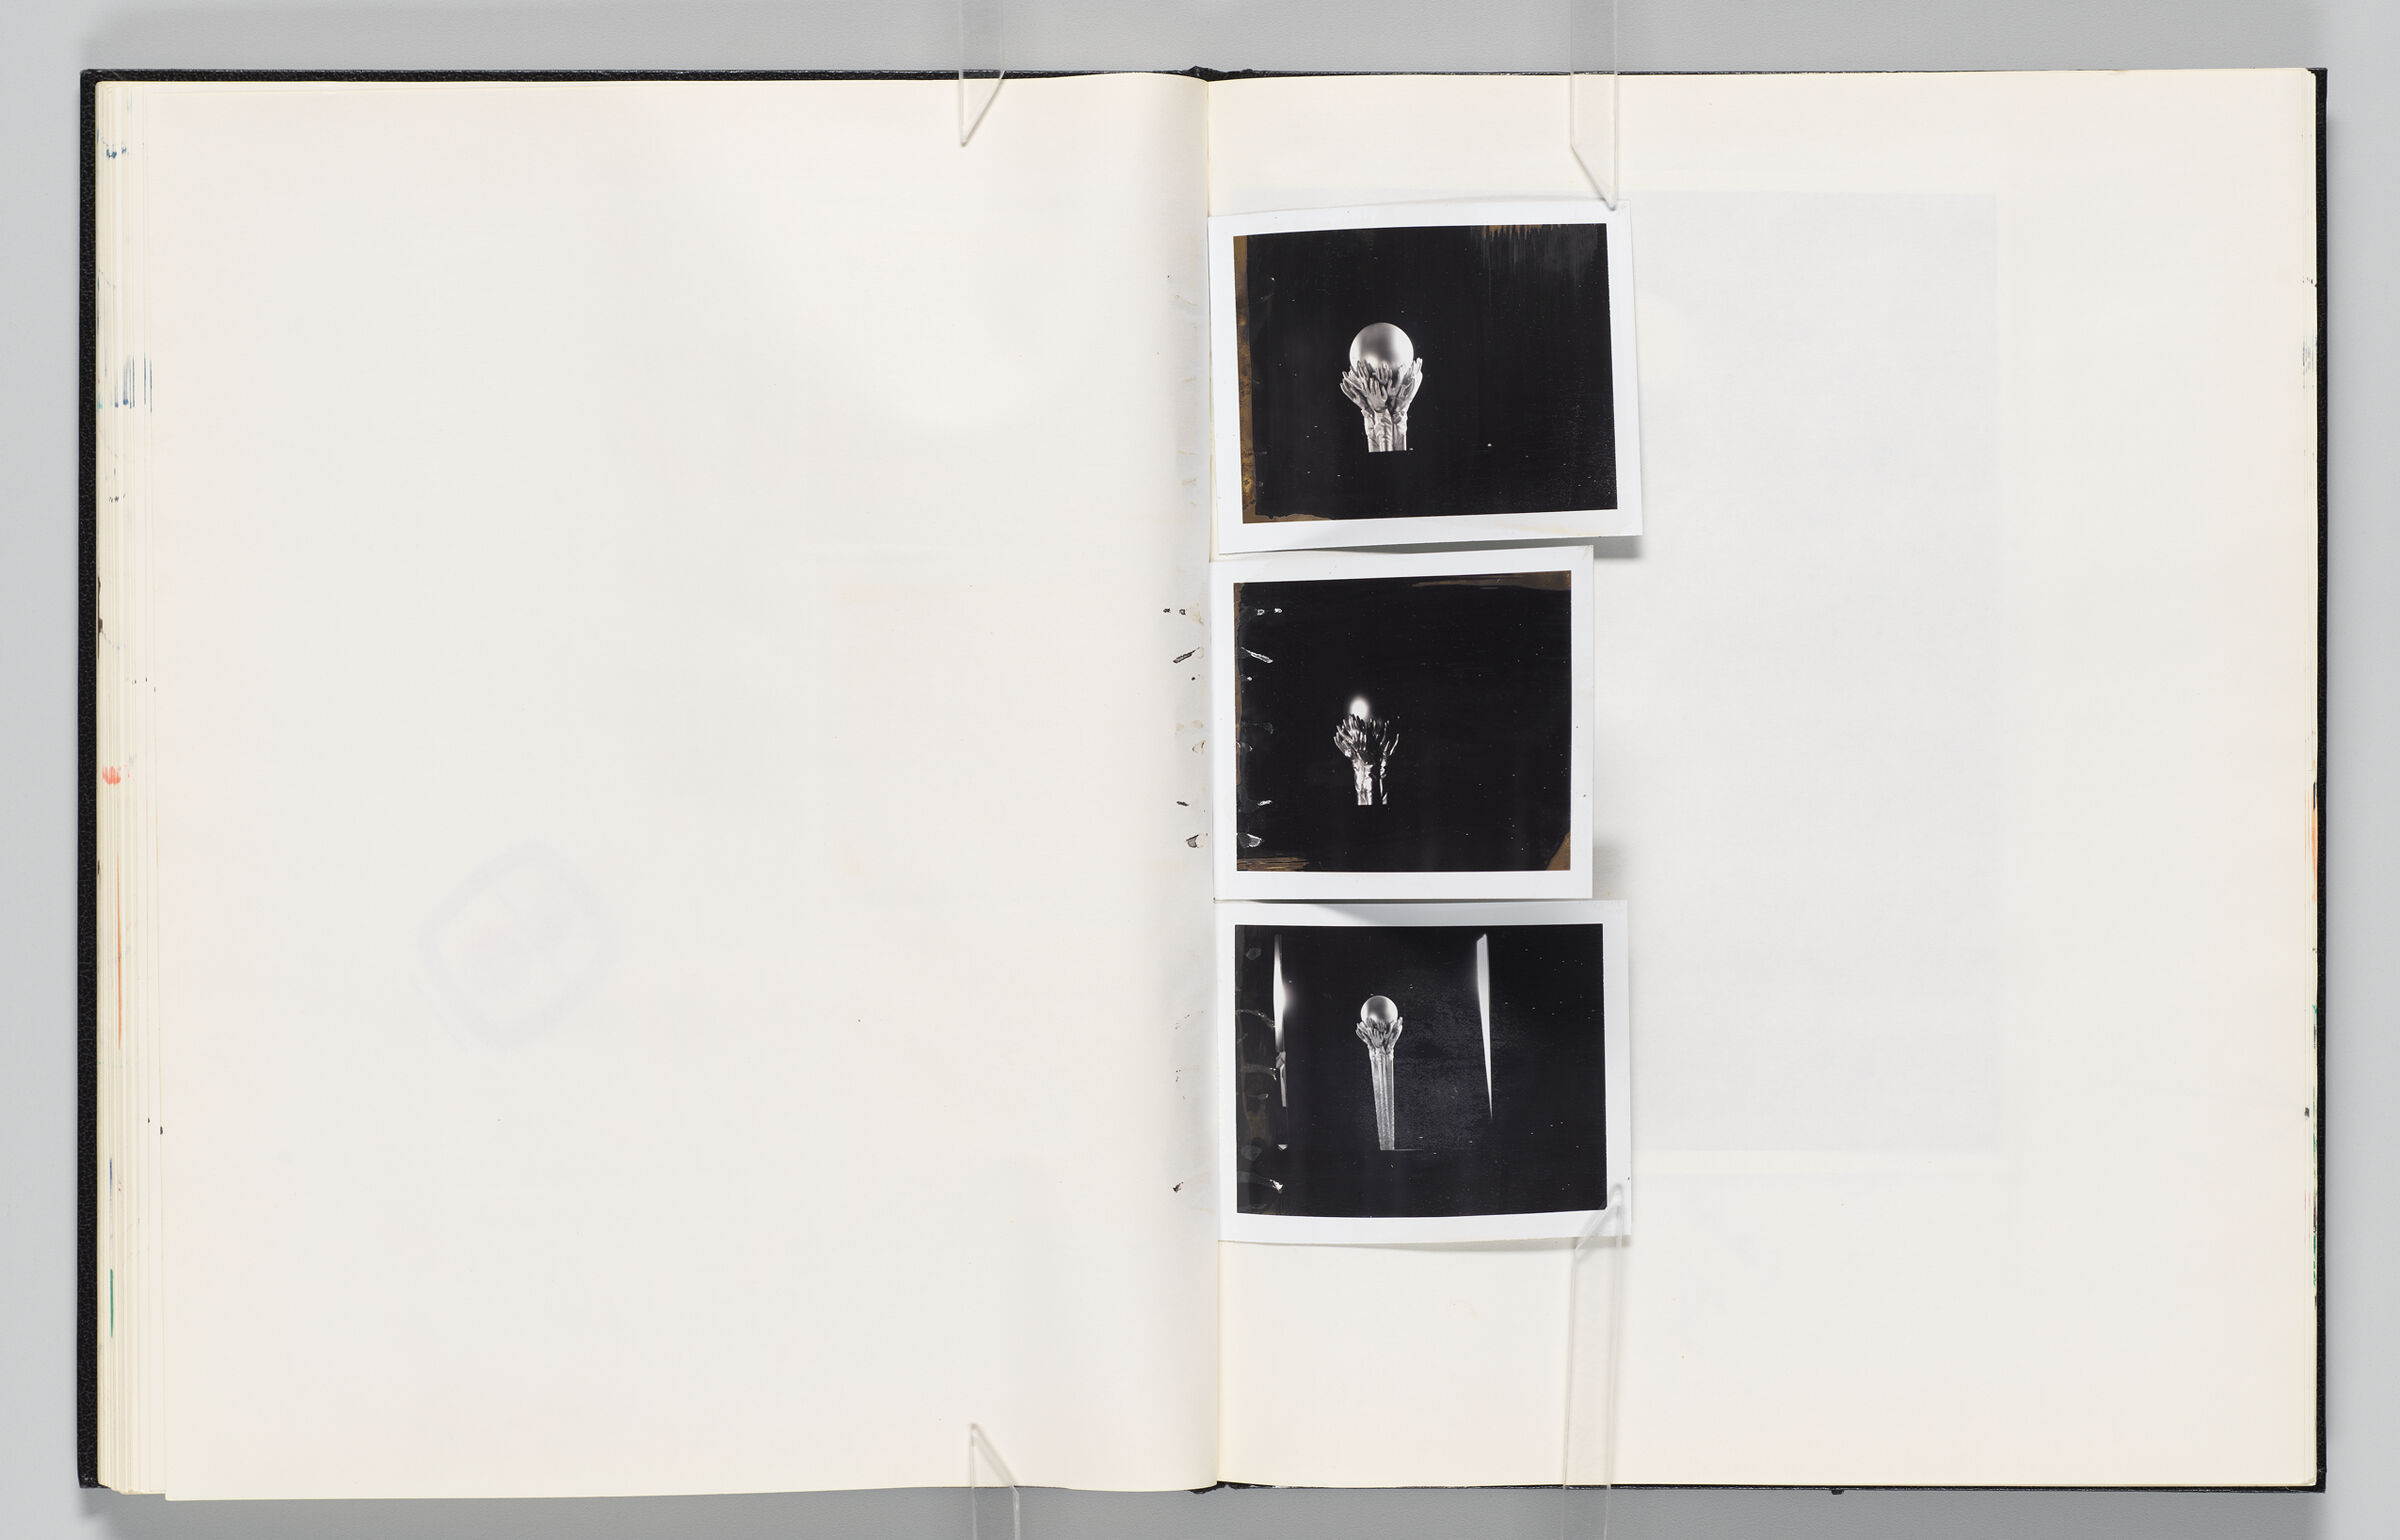 Untitled (Blank, Left Page); Untitled (Photographs Of Maquettes (Hands Holding Globe), Right Page)